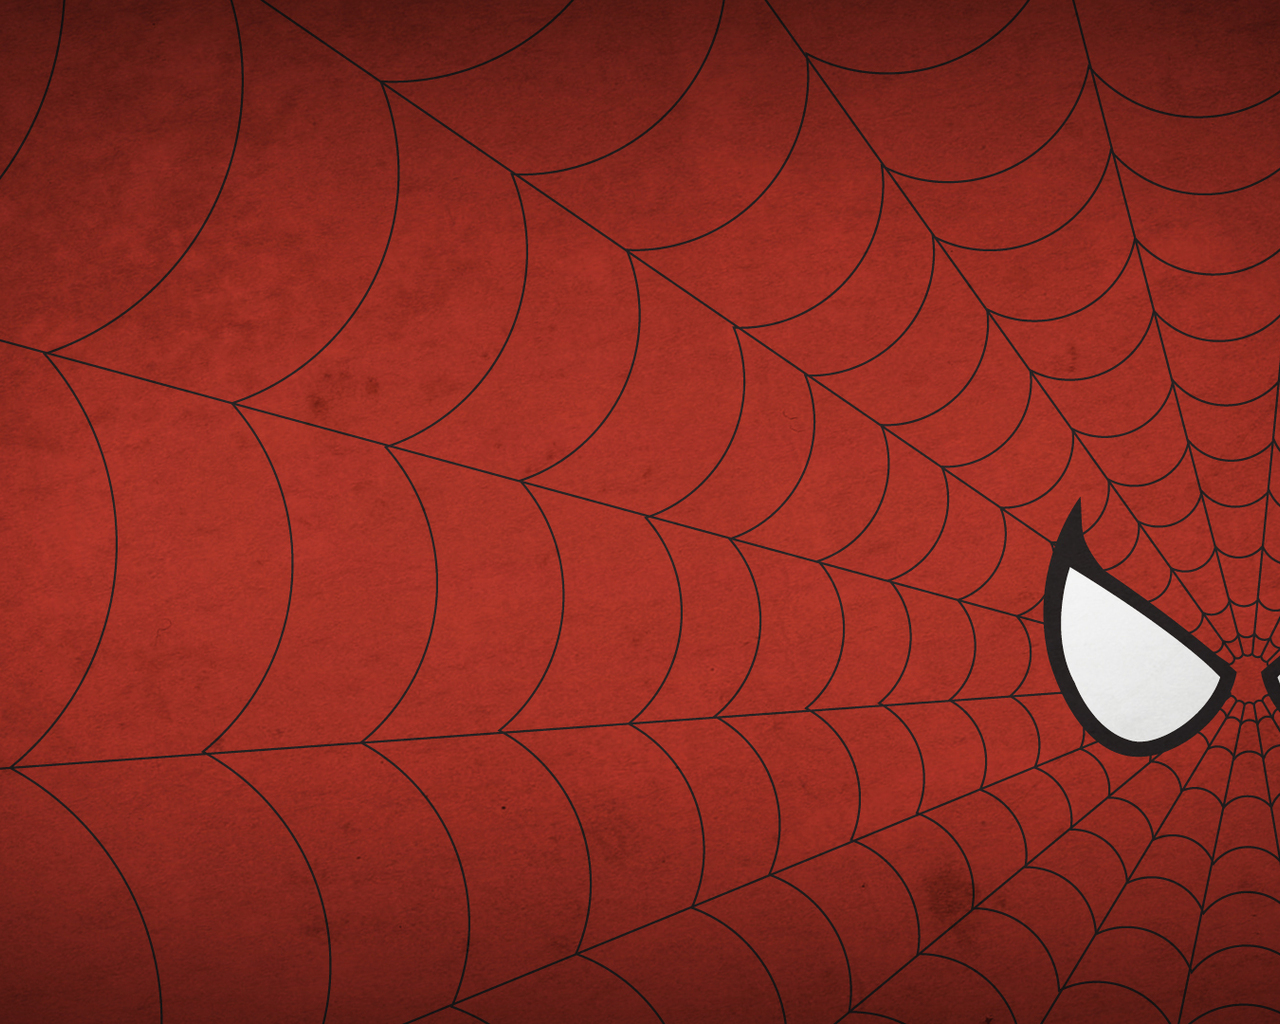 spider man, background, pictures, red